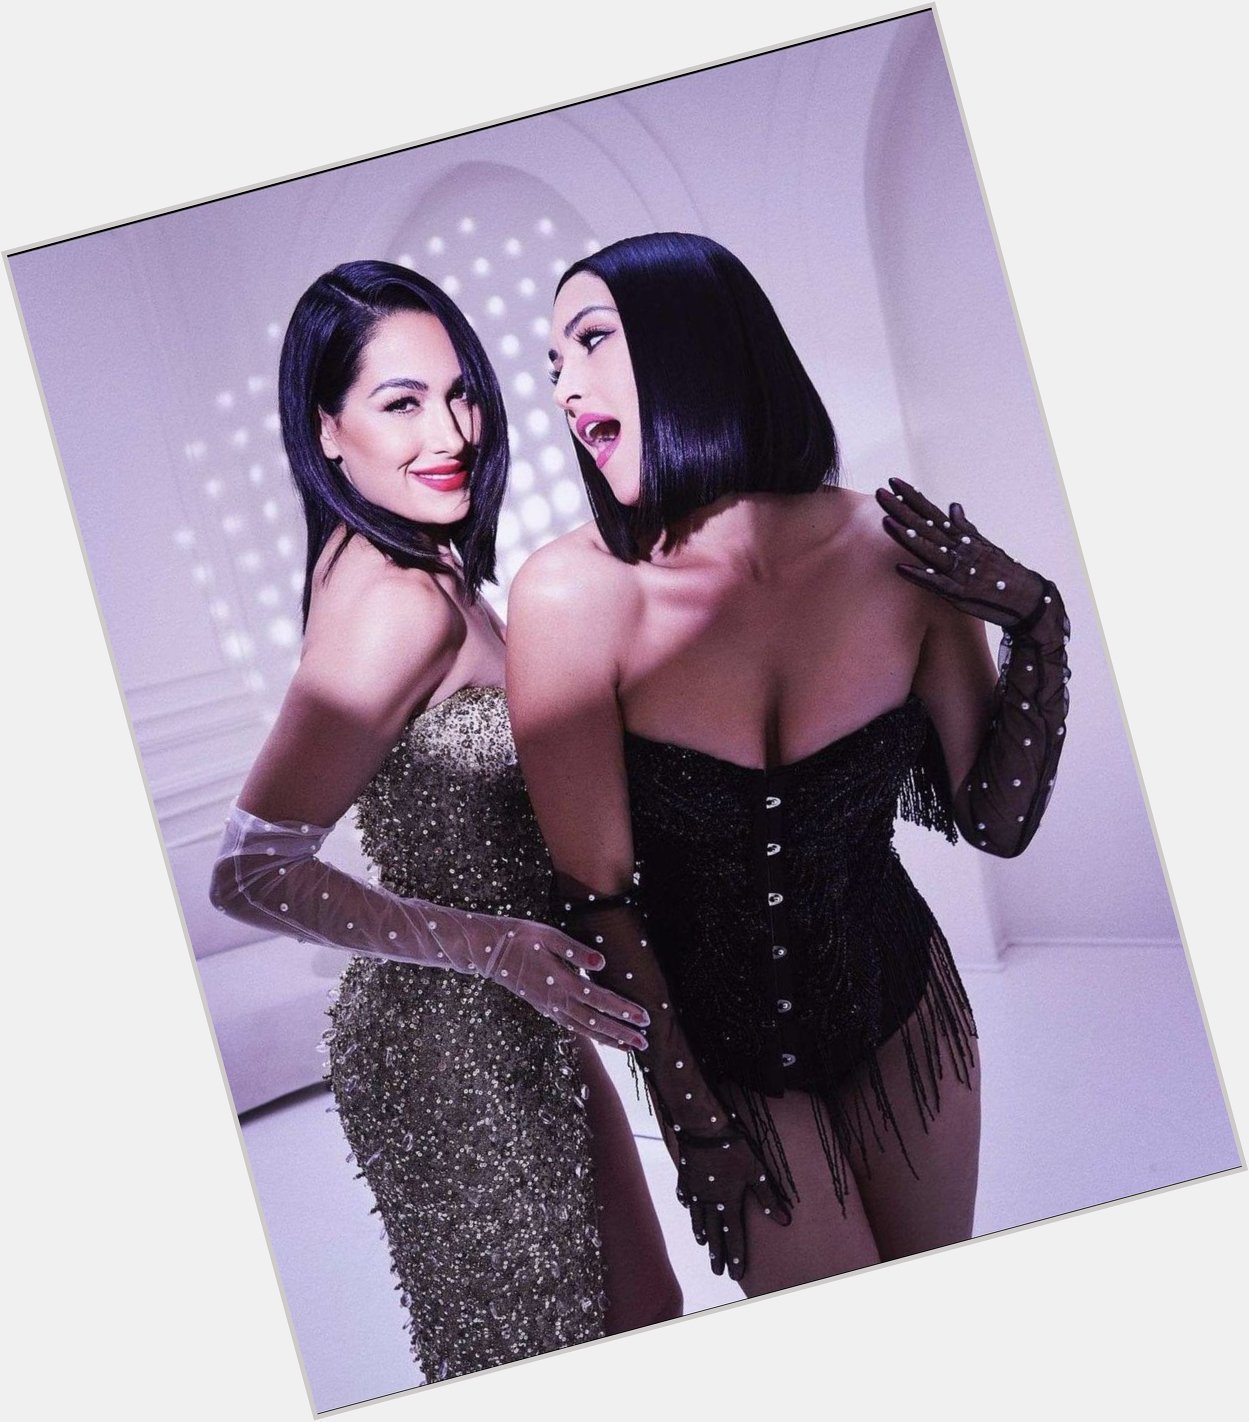 Happy birthday to greatest females of all time Nikki Bella and Brie Bella 